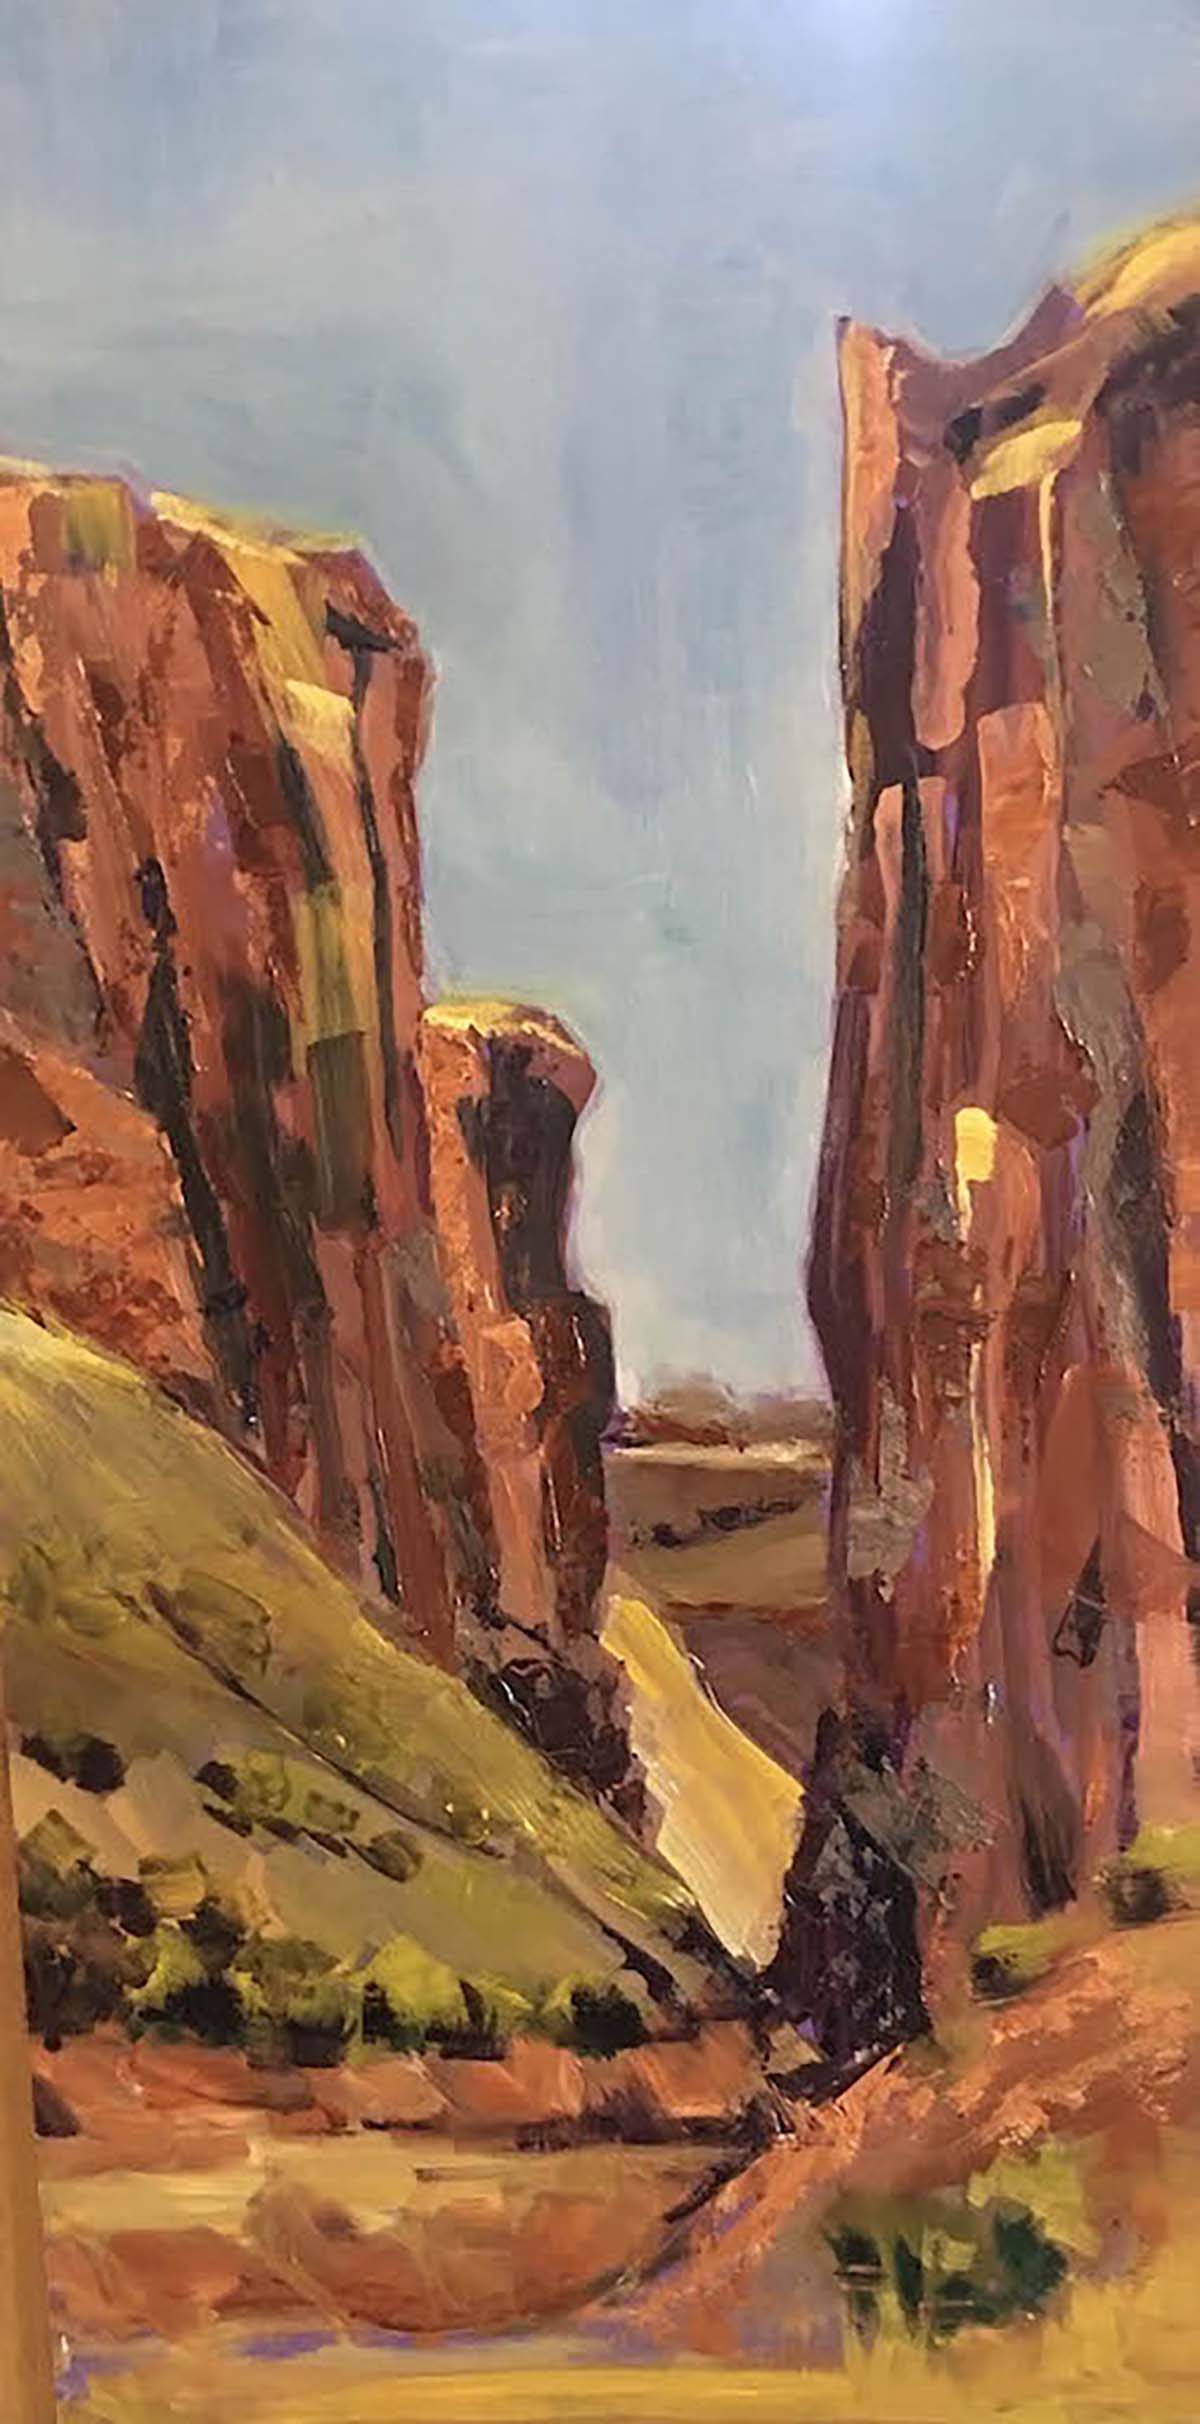 oil painting of desert landscape; two mountain peaks with path leading through